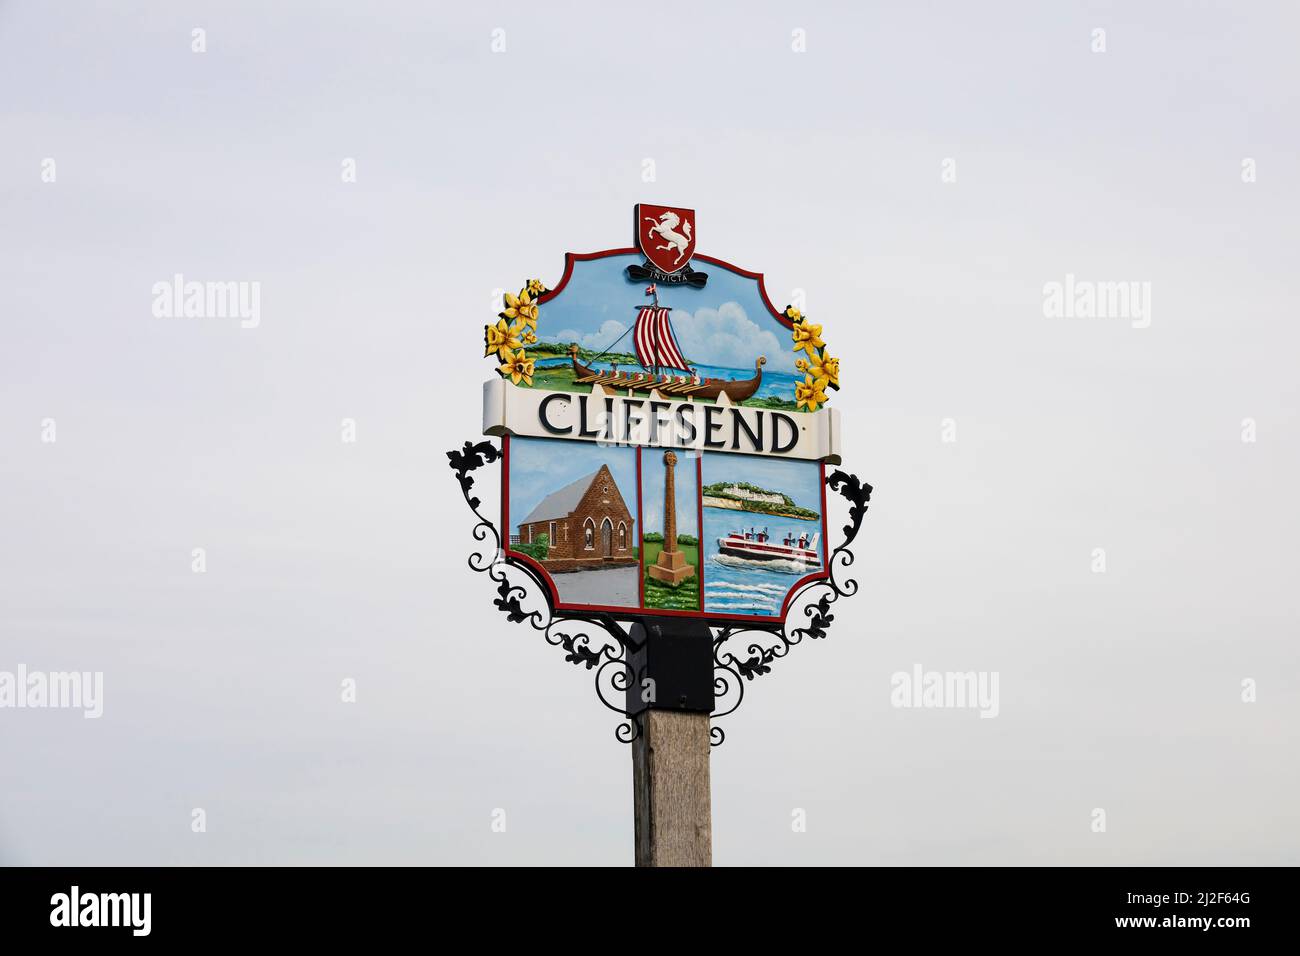 Village sign for Cliffsend, Kent, England. Featuring the Hugin viking ship and hovercraft. Stock Photo